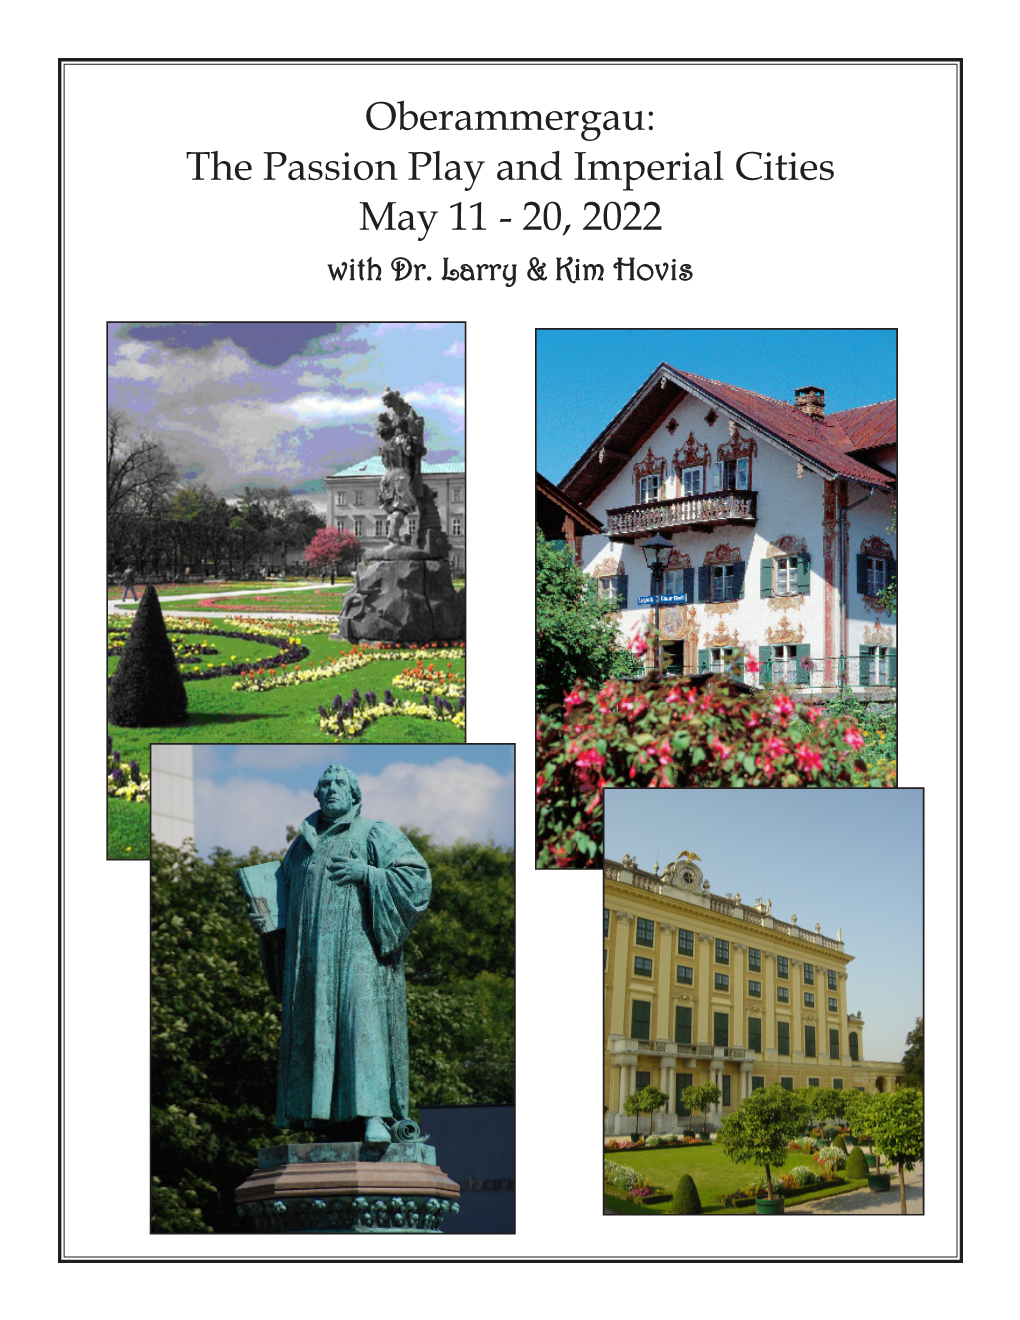 Oberammergau: the Passion Play and Imperial Cities May 11 - 20, 2022 with Dr